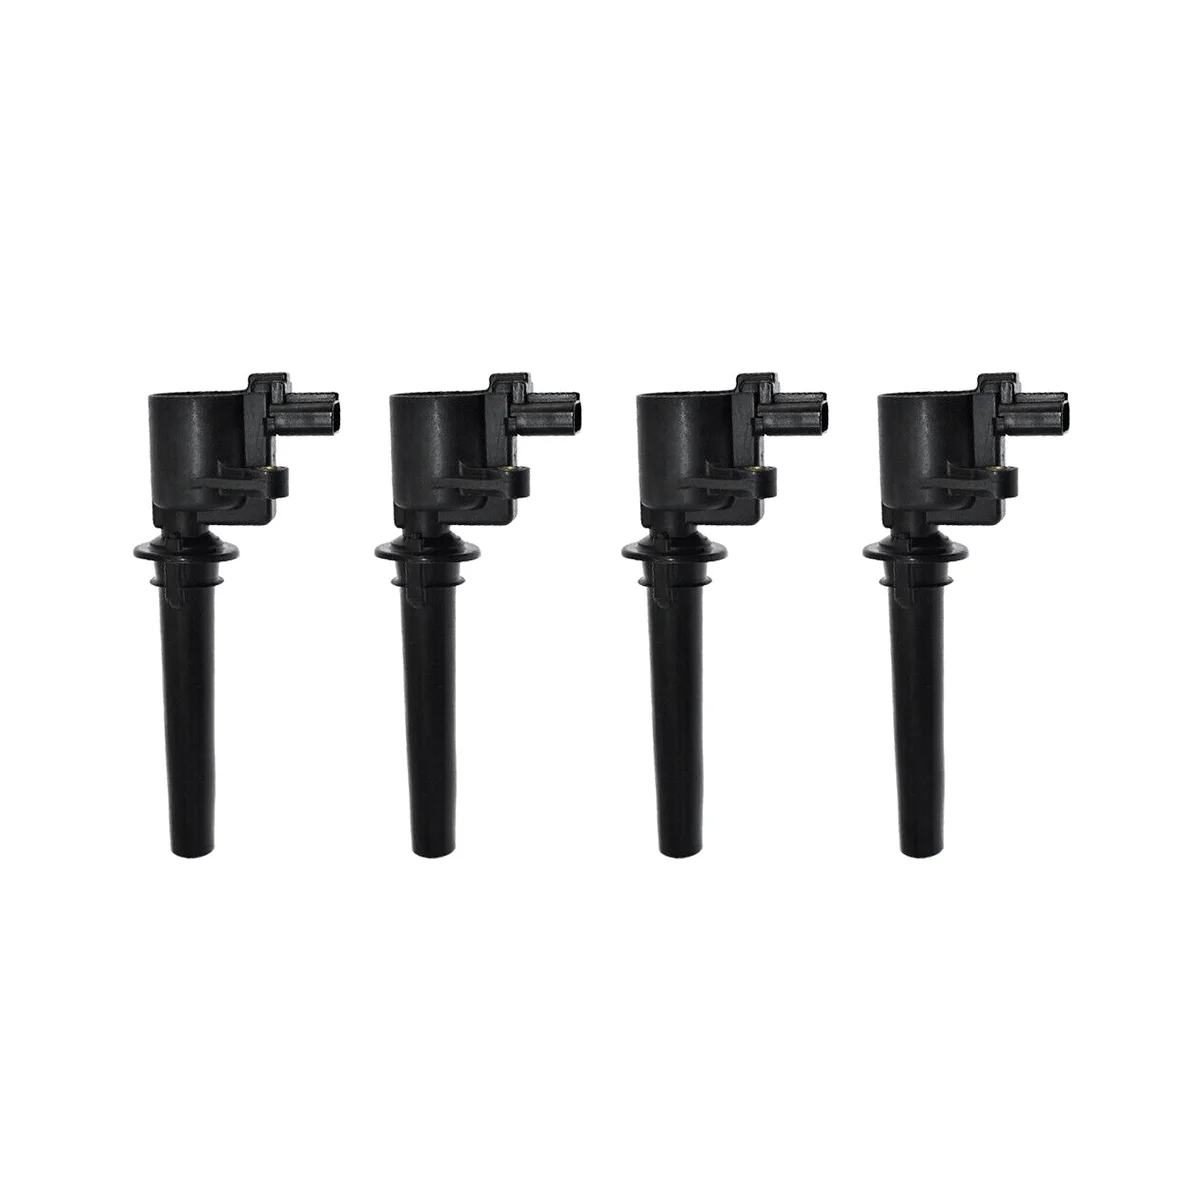 

4PCS 6G33-12A366-CA Ignition Coil for ASTON MARTIN VANTAGE 4.3 4.7